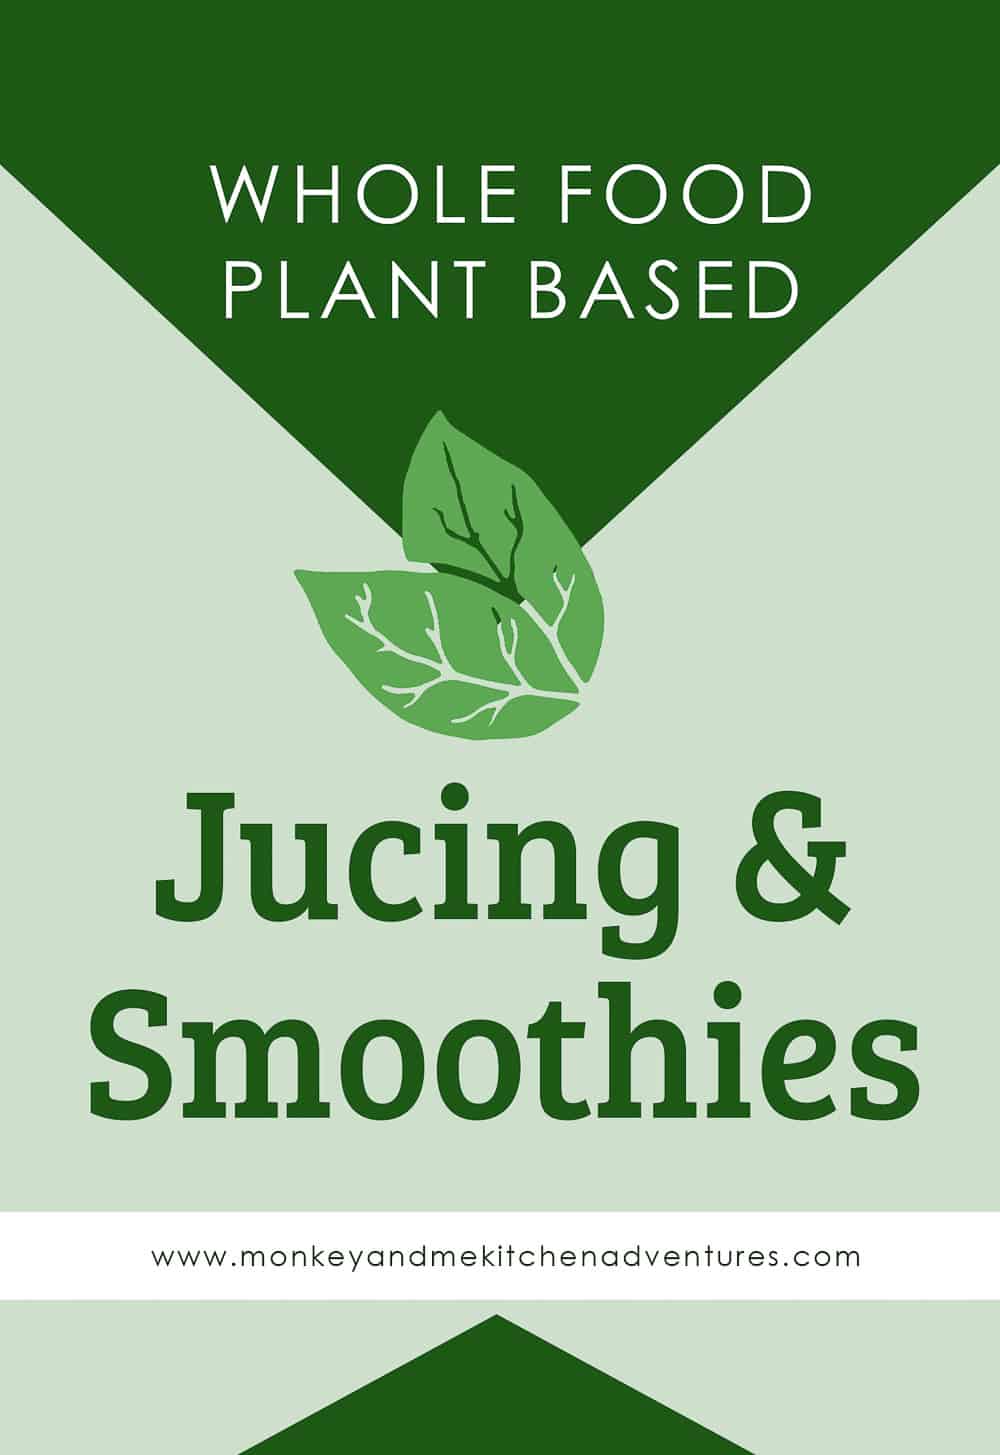 Juicing and smoothies, whole food plant based, resources